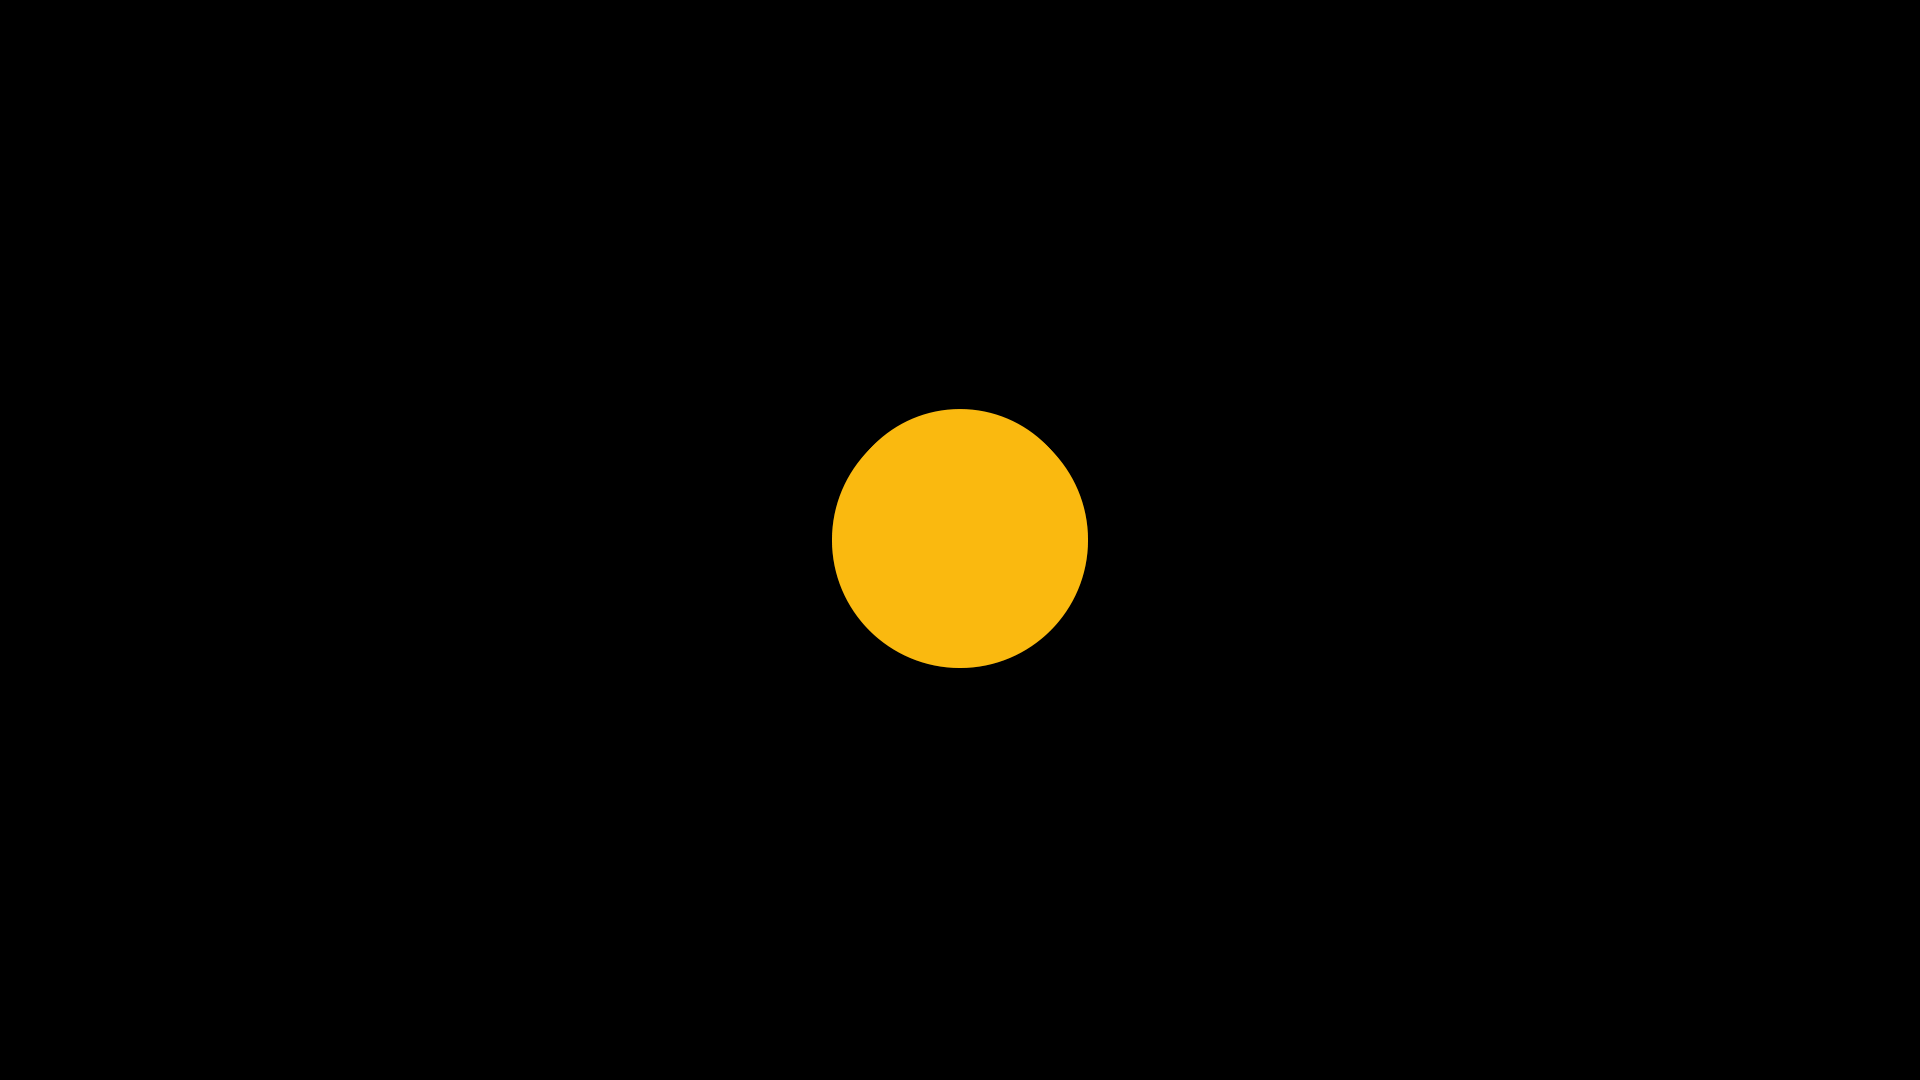 Icon for Yellow